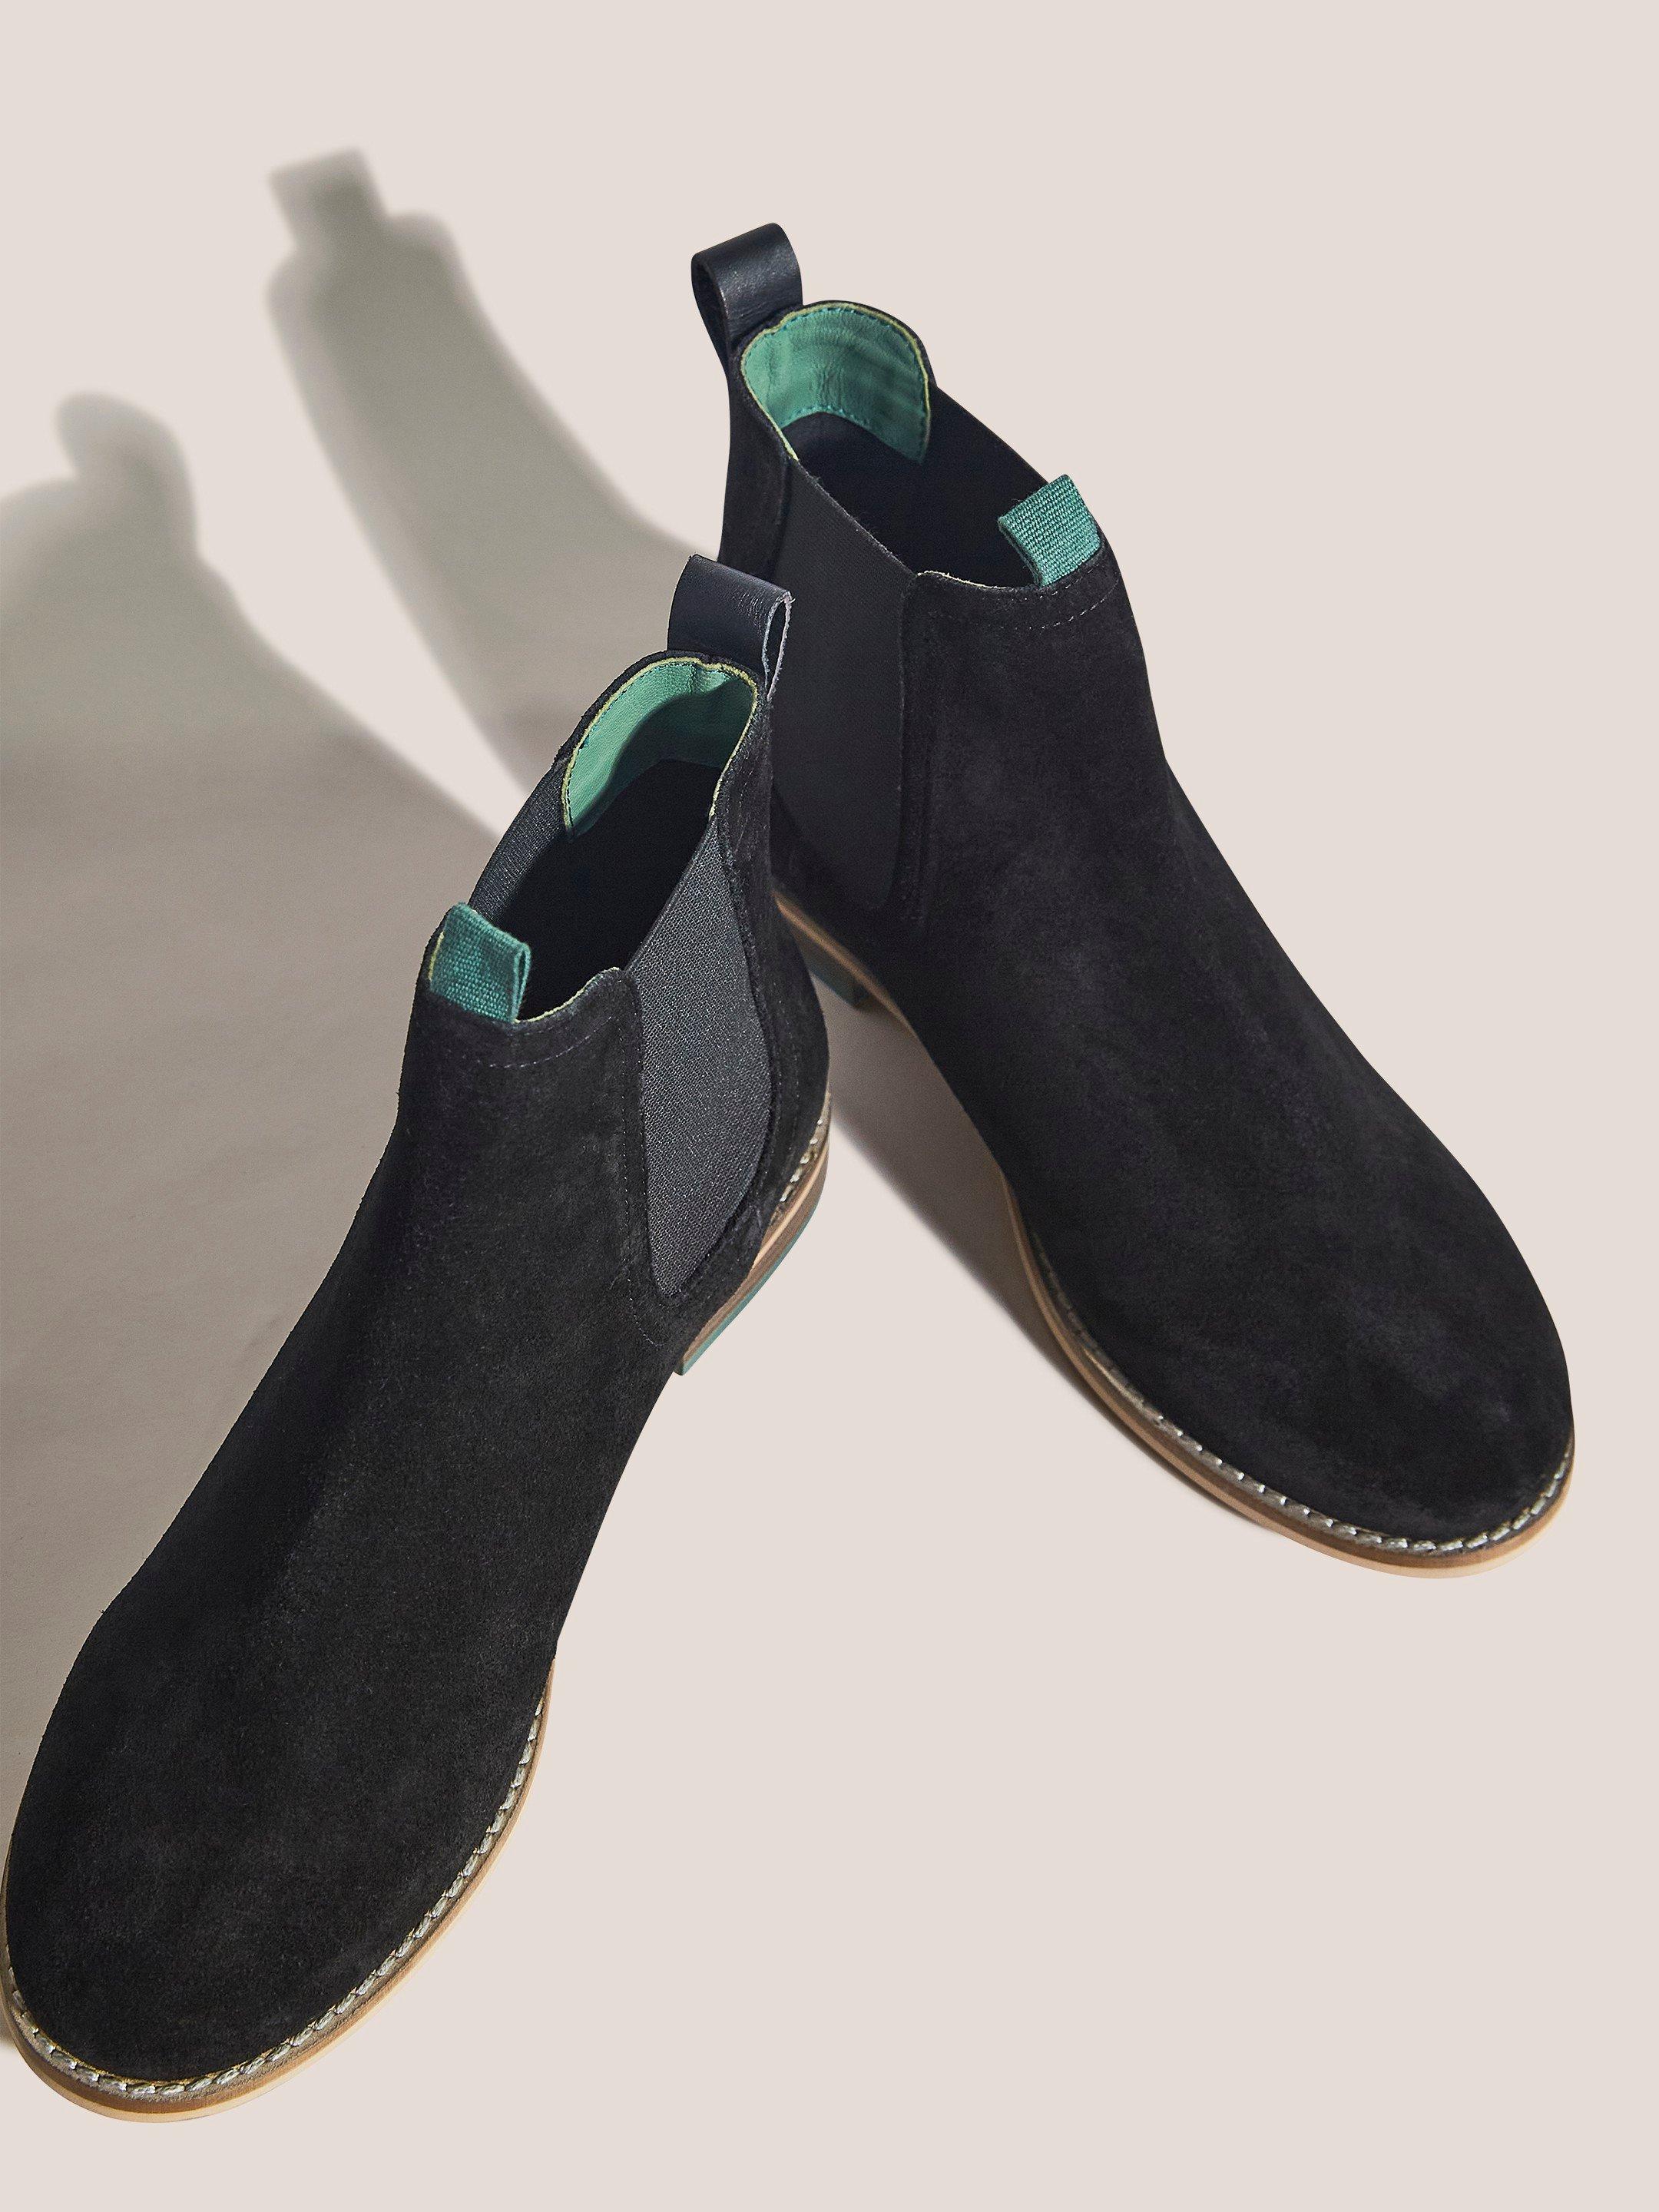 Flora Suede Chelsea Boot in PURE BLK - FLAT DETAIL